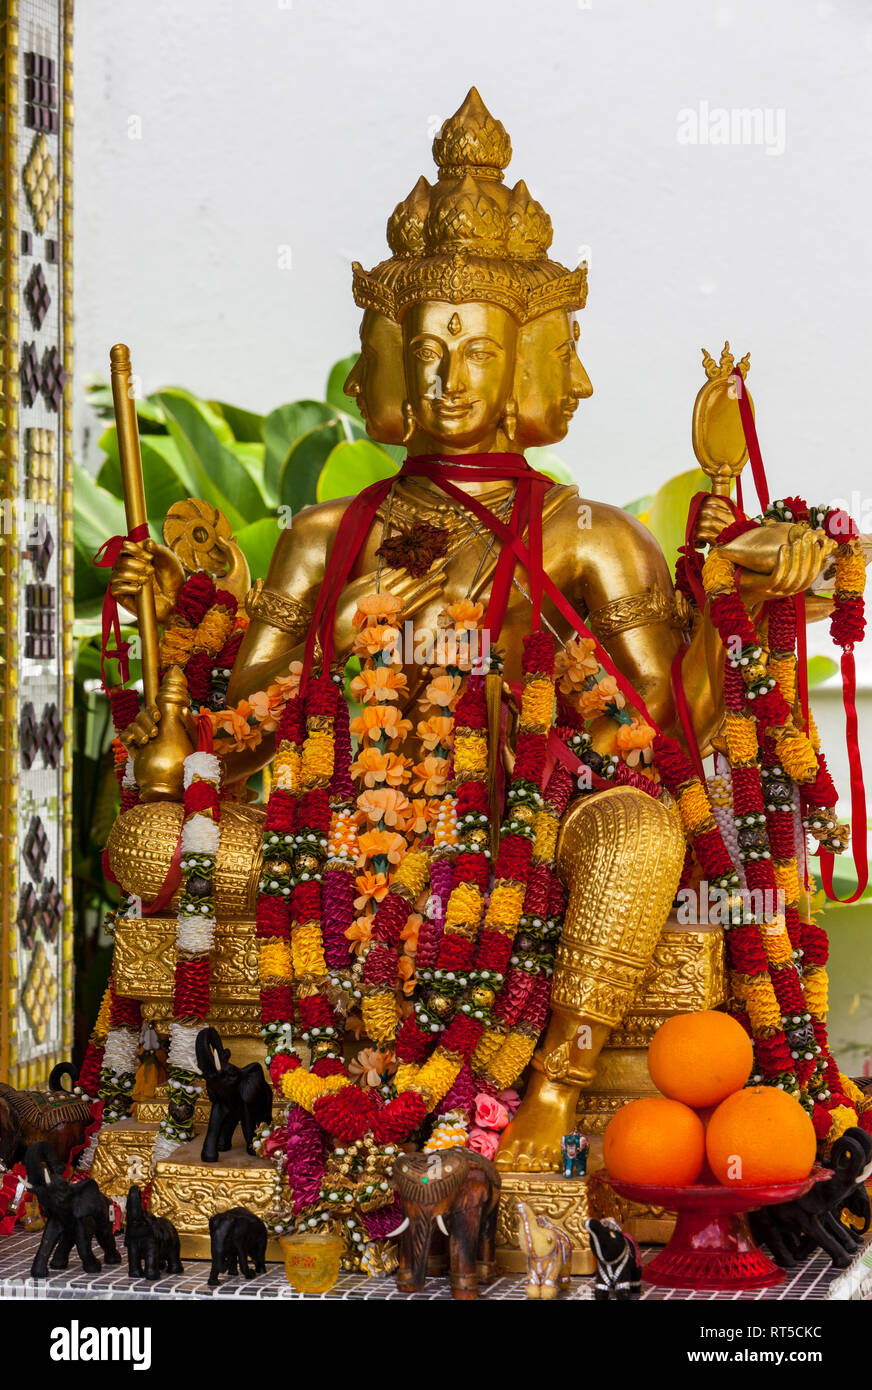 Statue of Hindu Lord Brahma, Gift of Thailand, Popular among ...